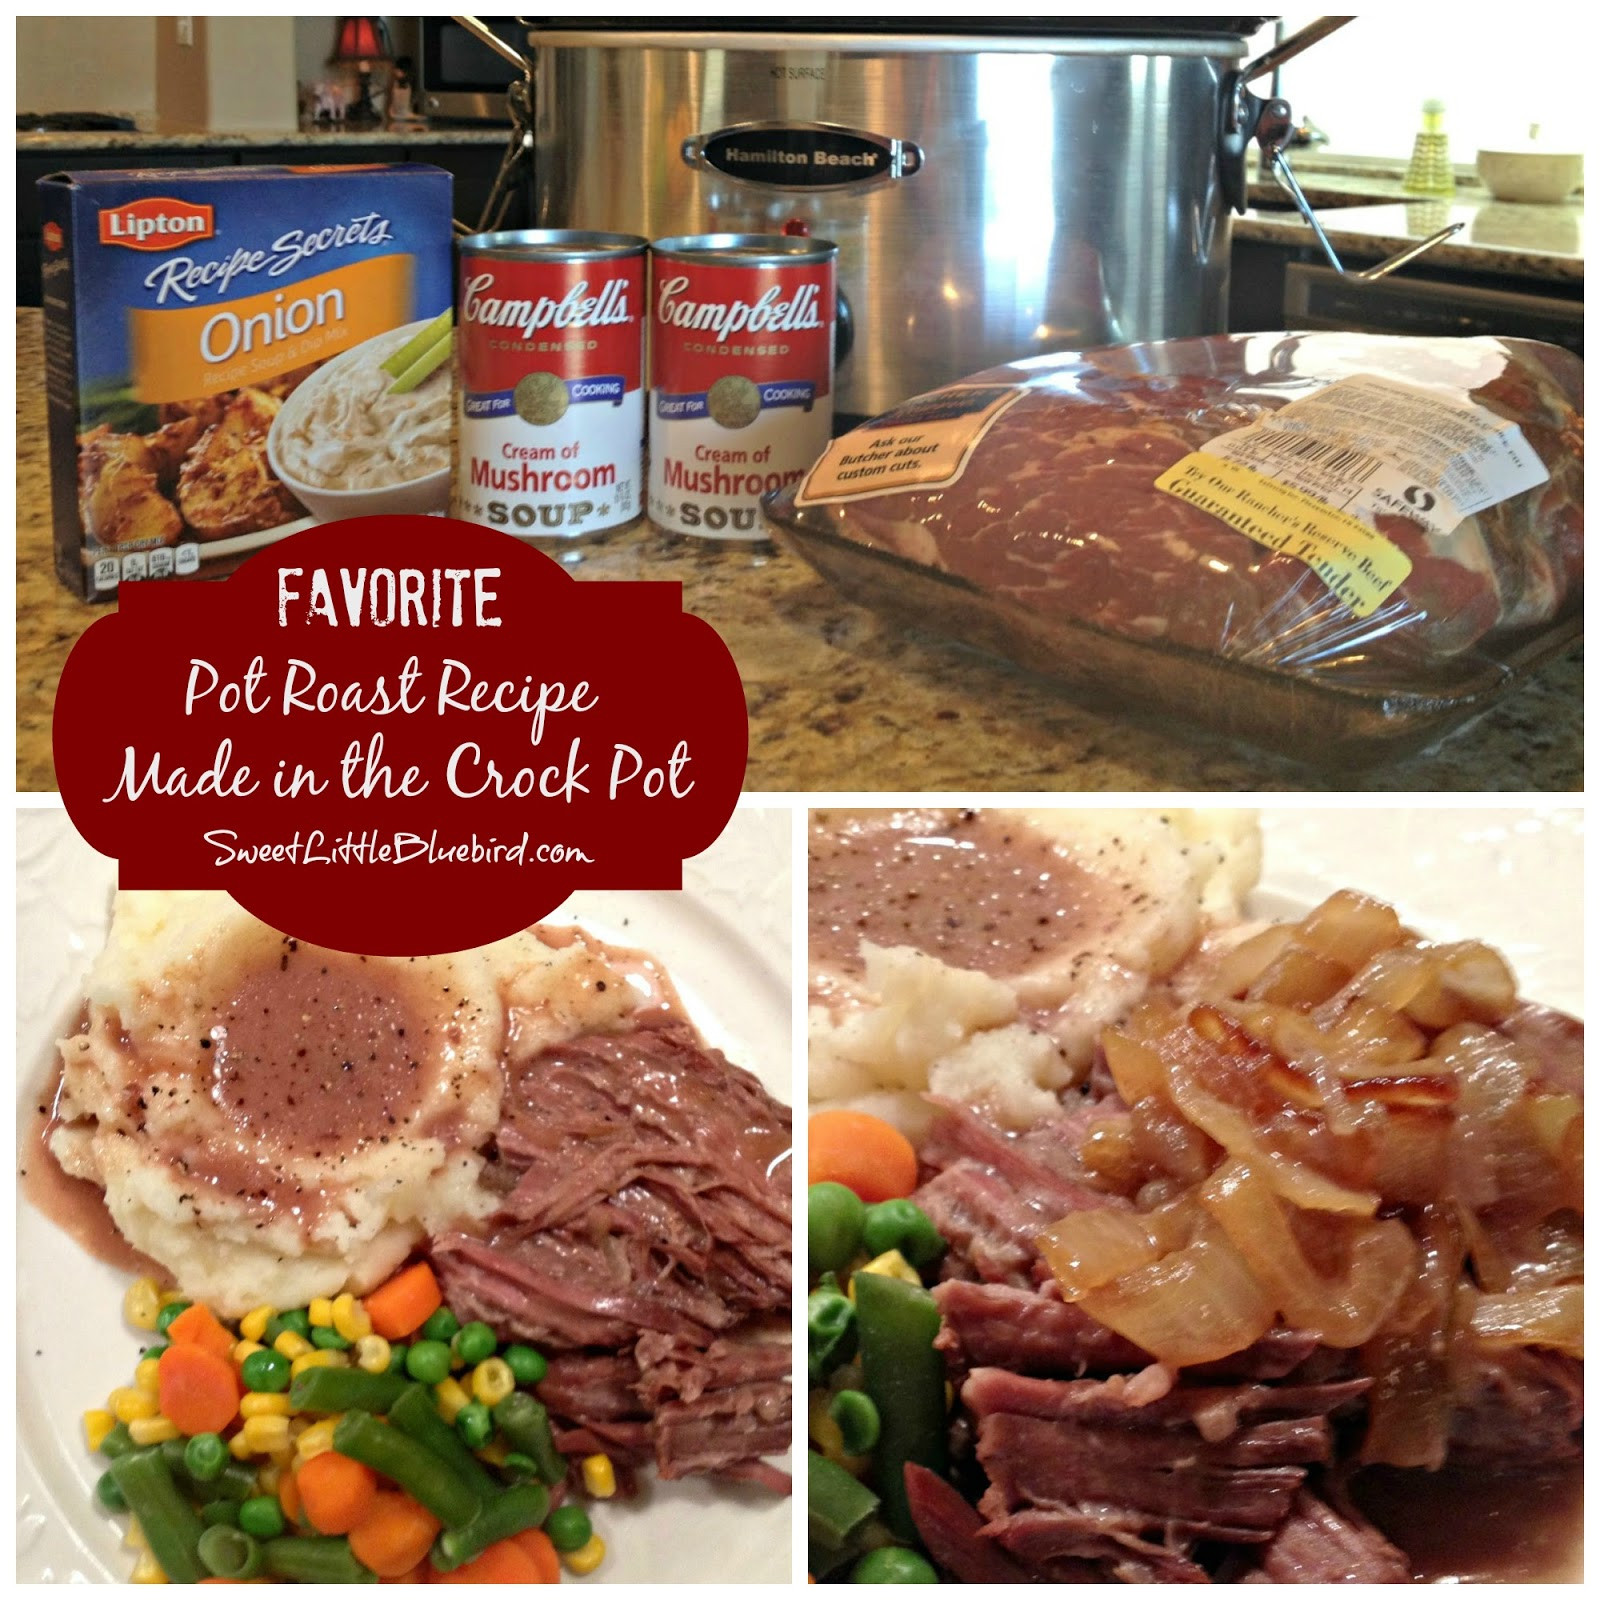 Crock Pot Roast Beef With Onion Soup Mix
 beef roast with lipton onion soup mix and cream of